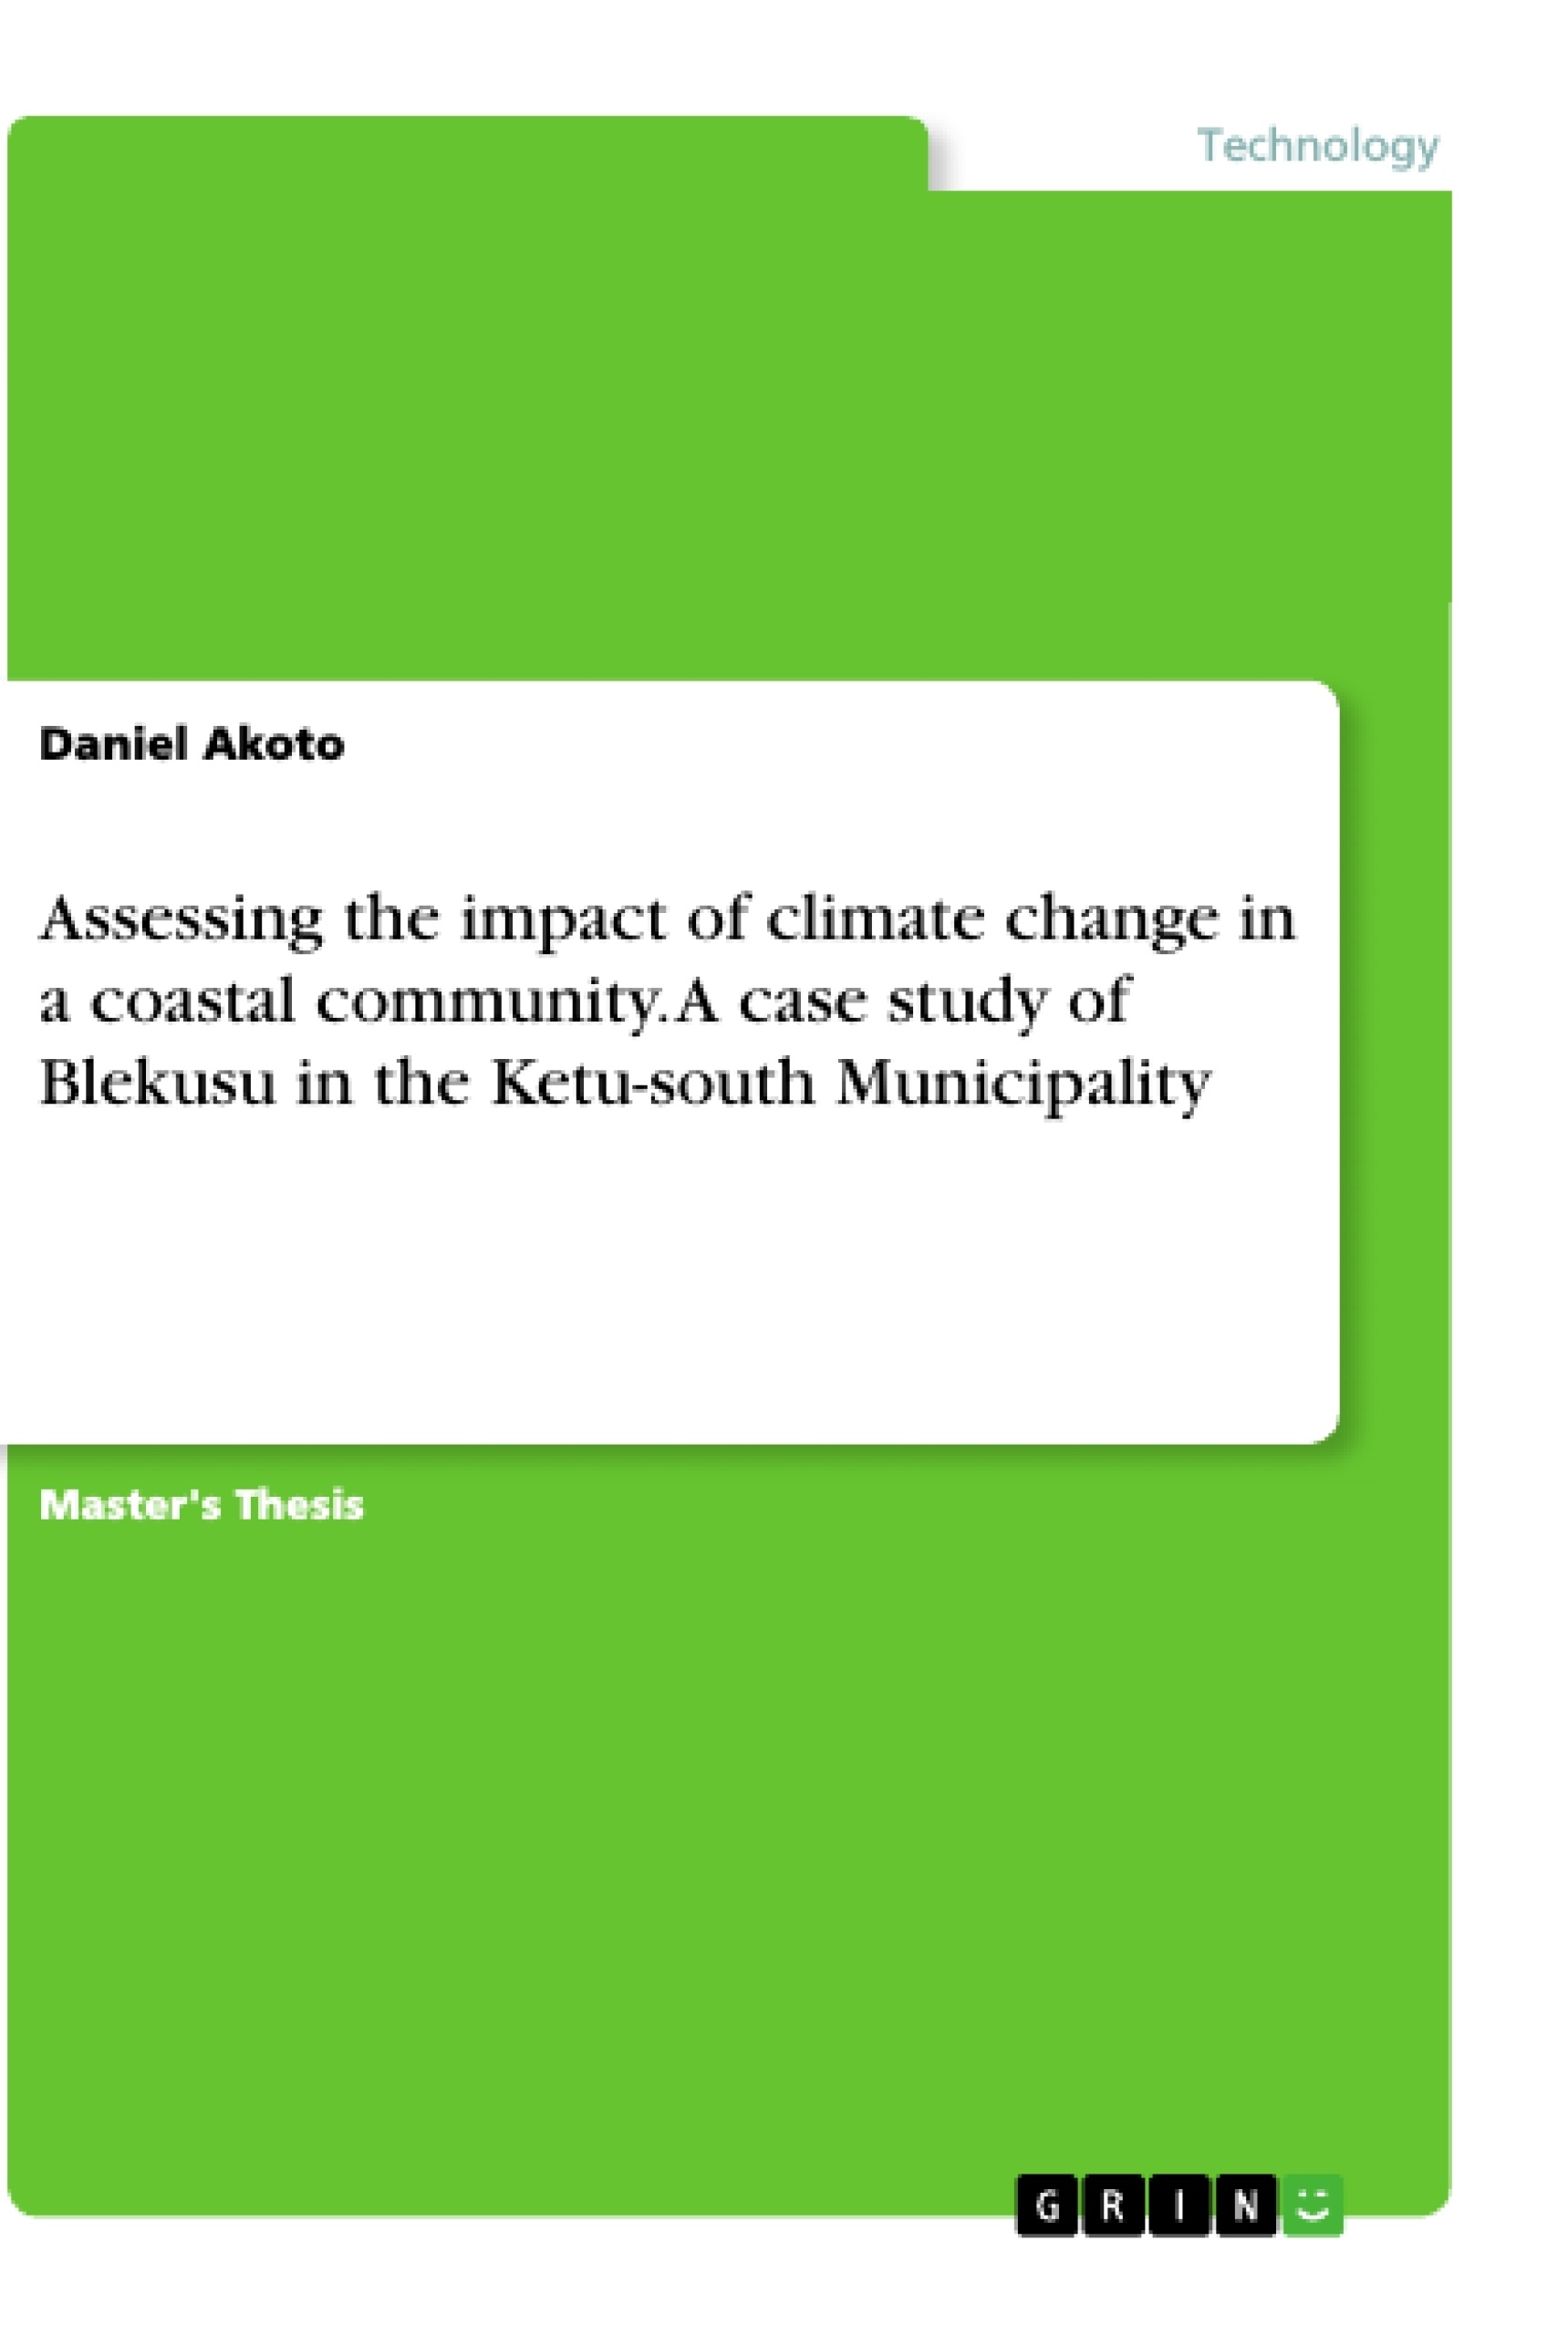 Titre: Assessing the impact of climate change in a coastal community. A case study of Blekusu in the Ketu-south Municipality